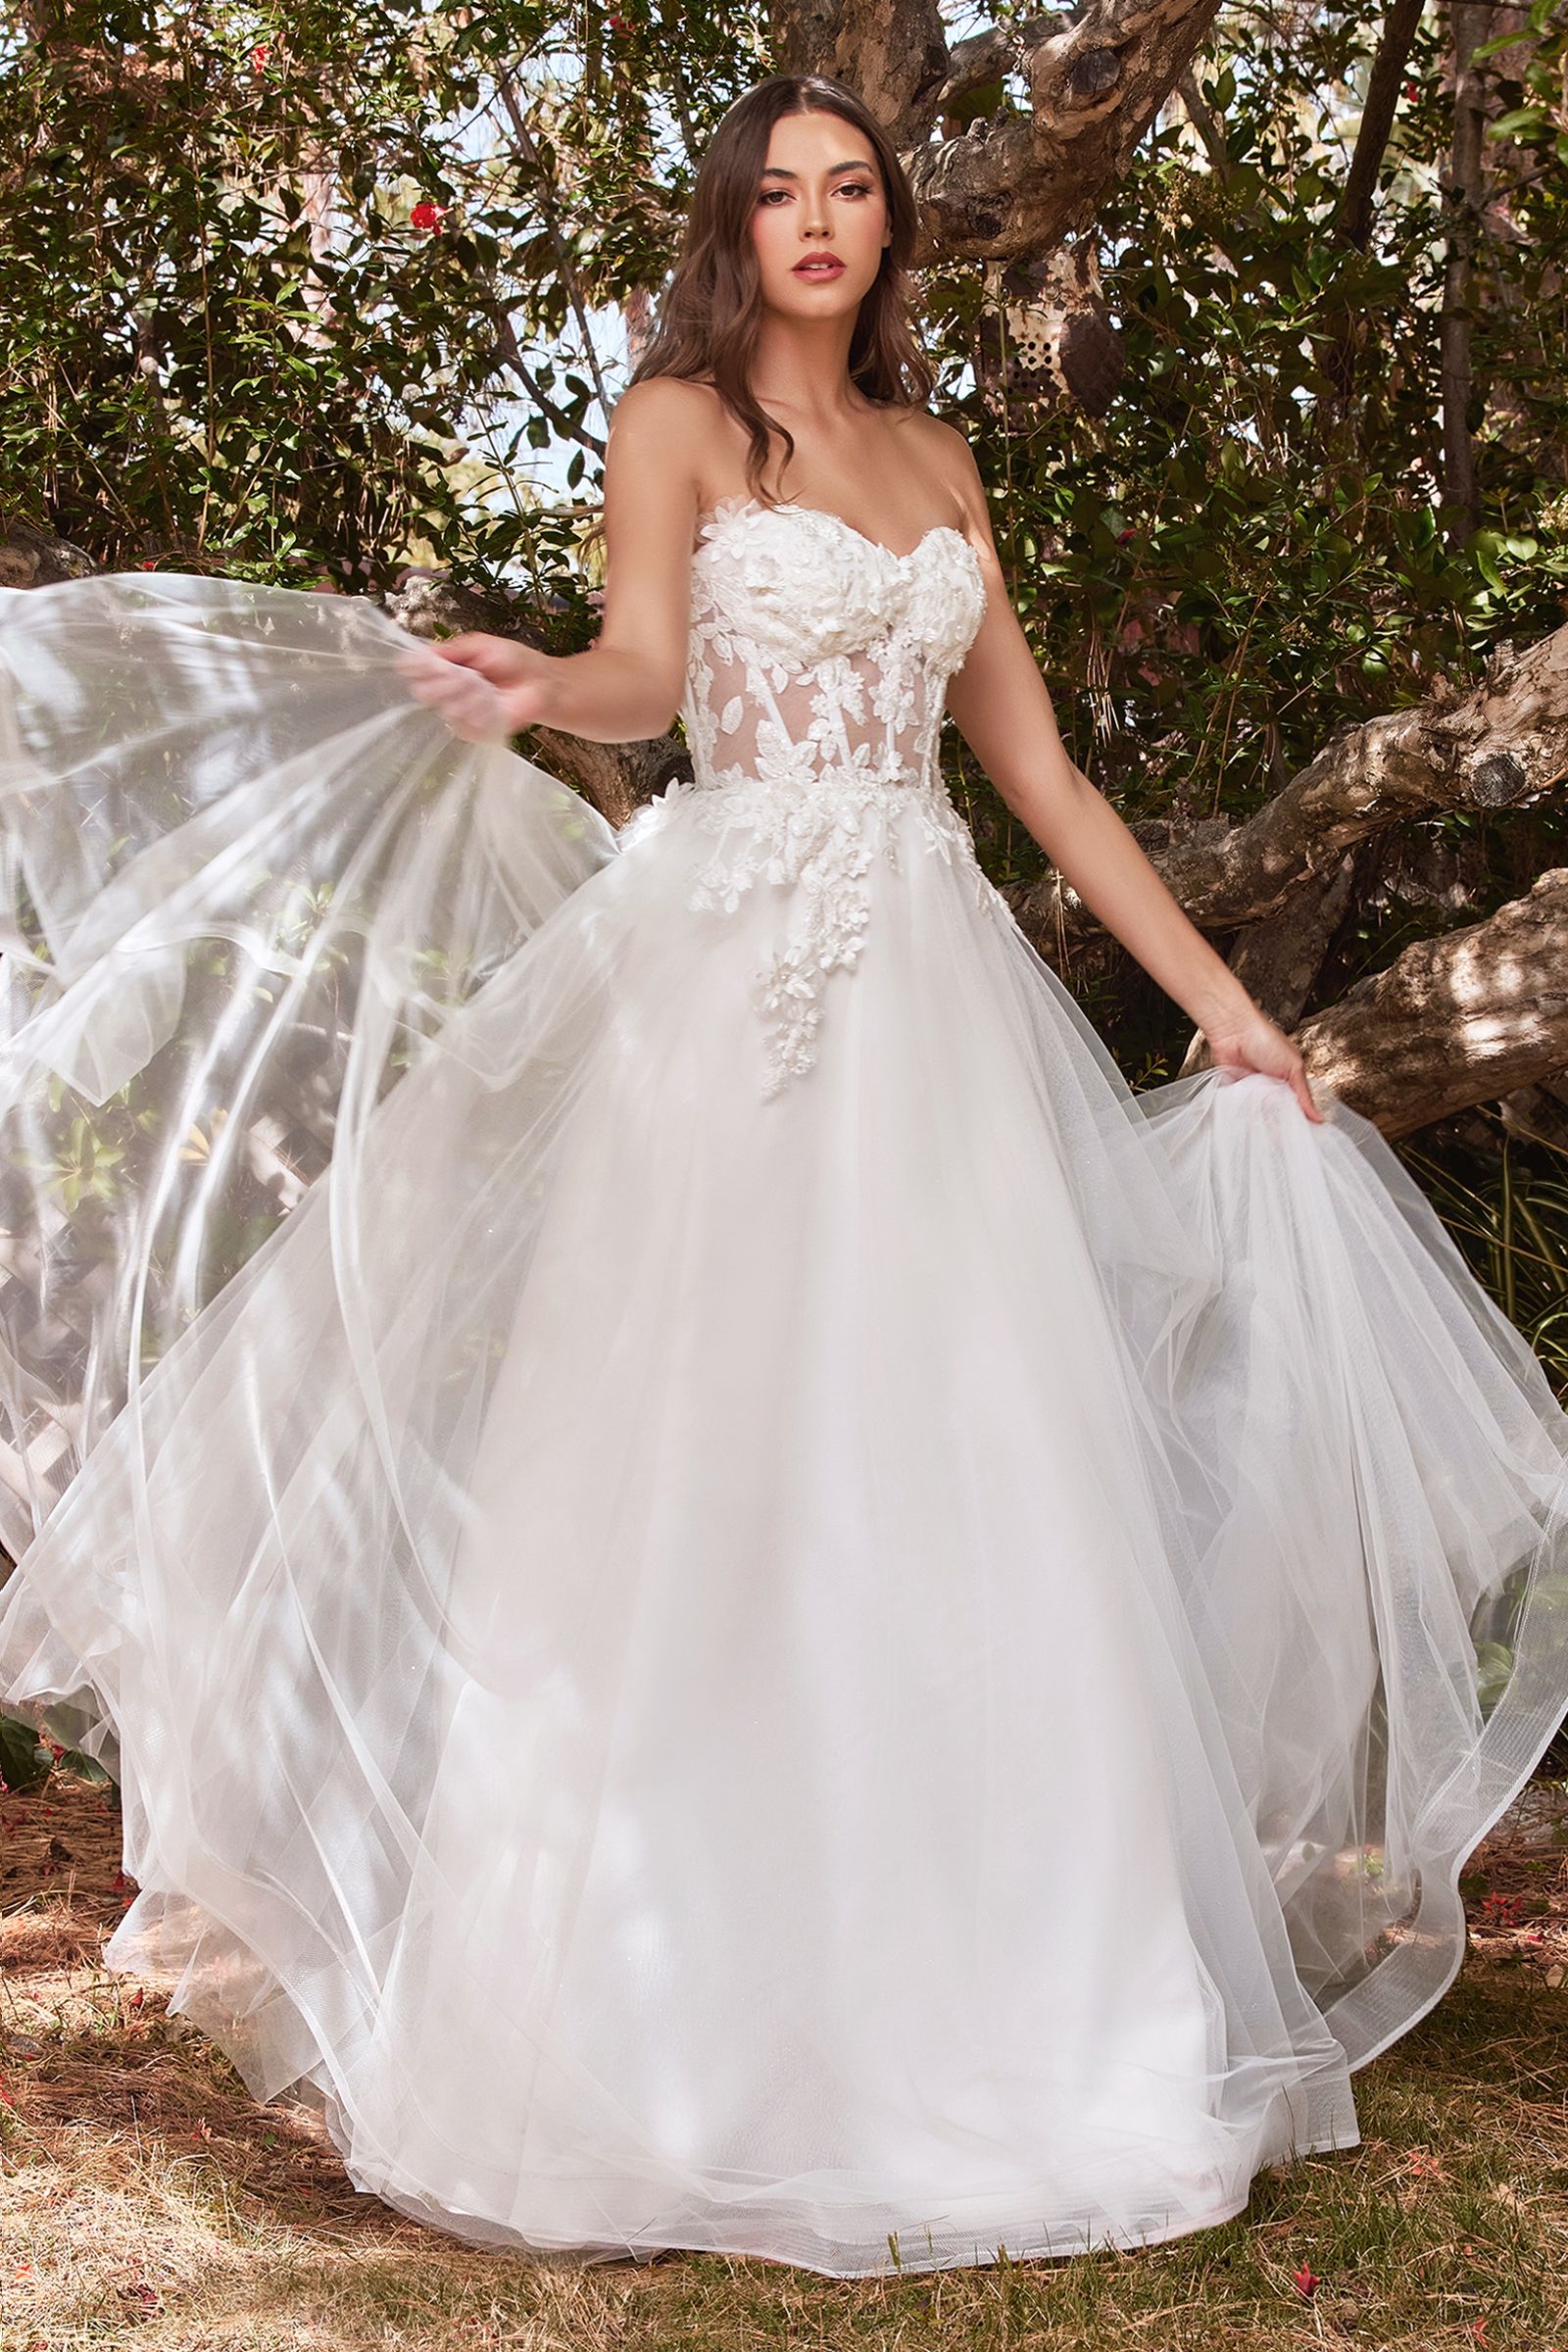 Divinity Bridal AURORA SERAPHINE Off White Tulle Floral Corset Wedding Gown